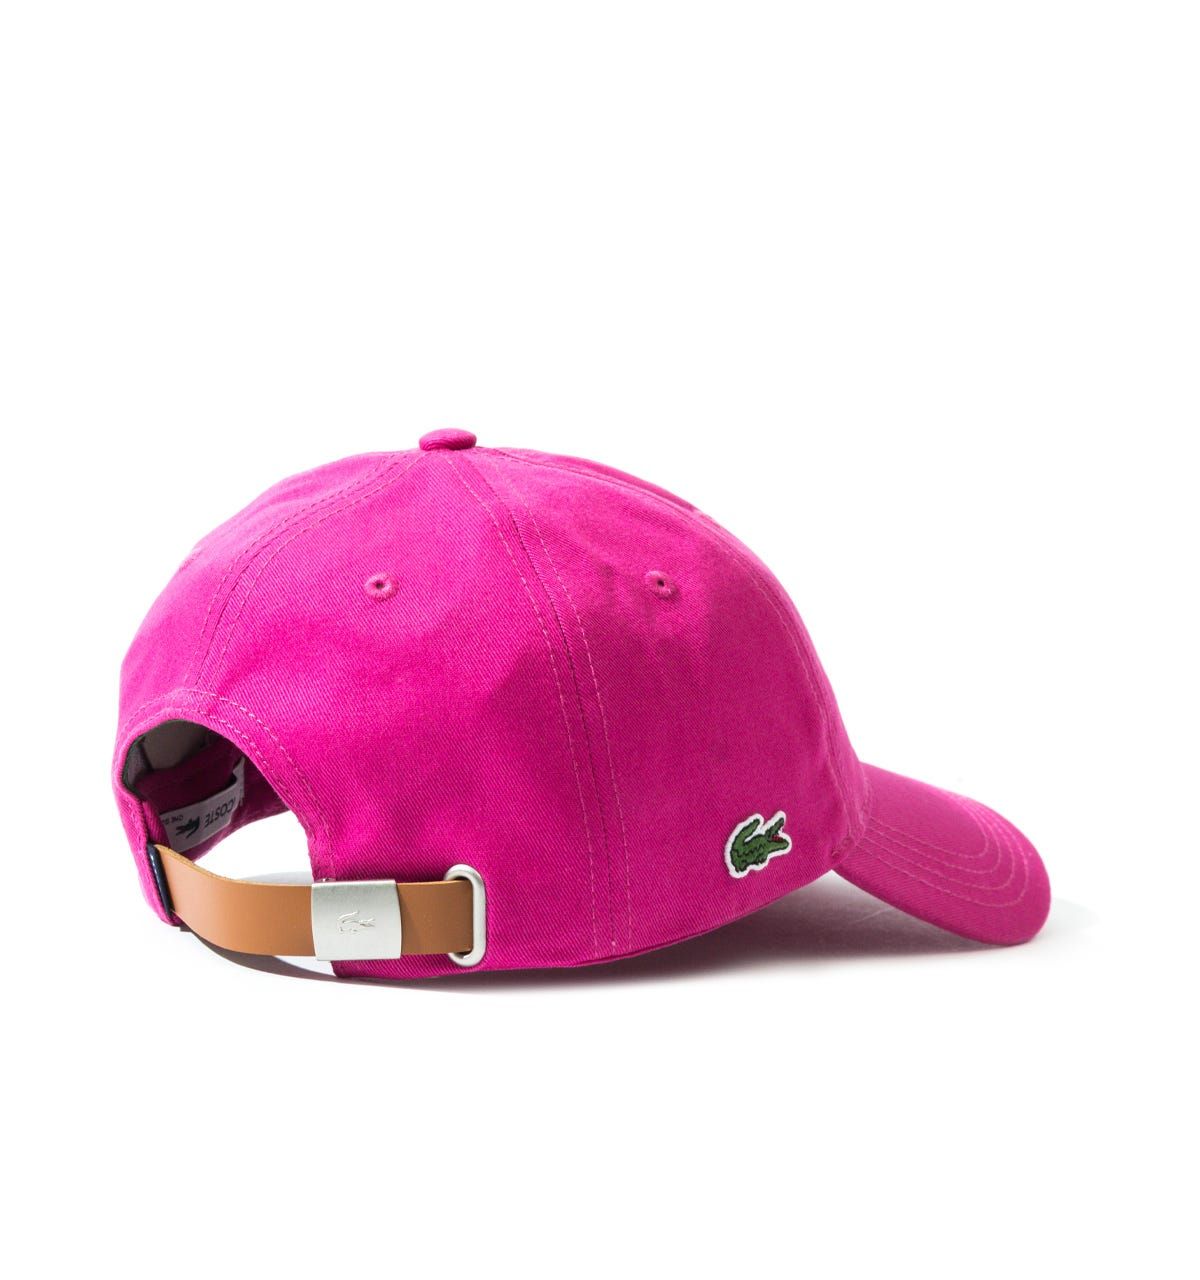 <p>A six-panel cap, crafted by Lacoste. The Lacoste Casquette Pink Cap is a pure polyester composition fitted with vented eyelets and a pre-curved bill. The design is finished with the Lacoste logo embroidered on the front.</p><ul><li>Polyester composition</li><li>Pe-curved</li><li>Tonal stitching</li><li>Adjustable back strap</li><li>Lacoste logo embroidered on front</li></ul>